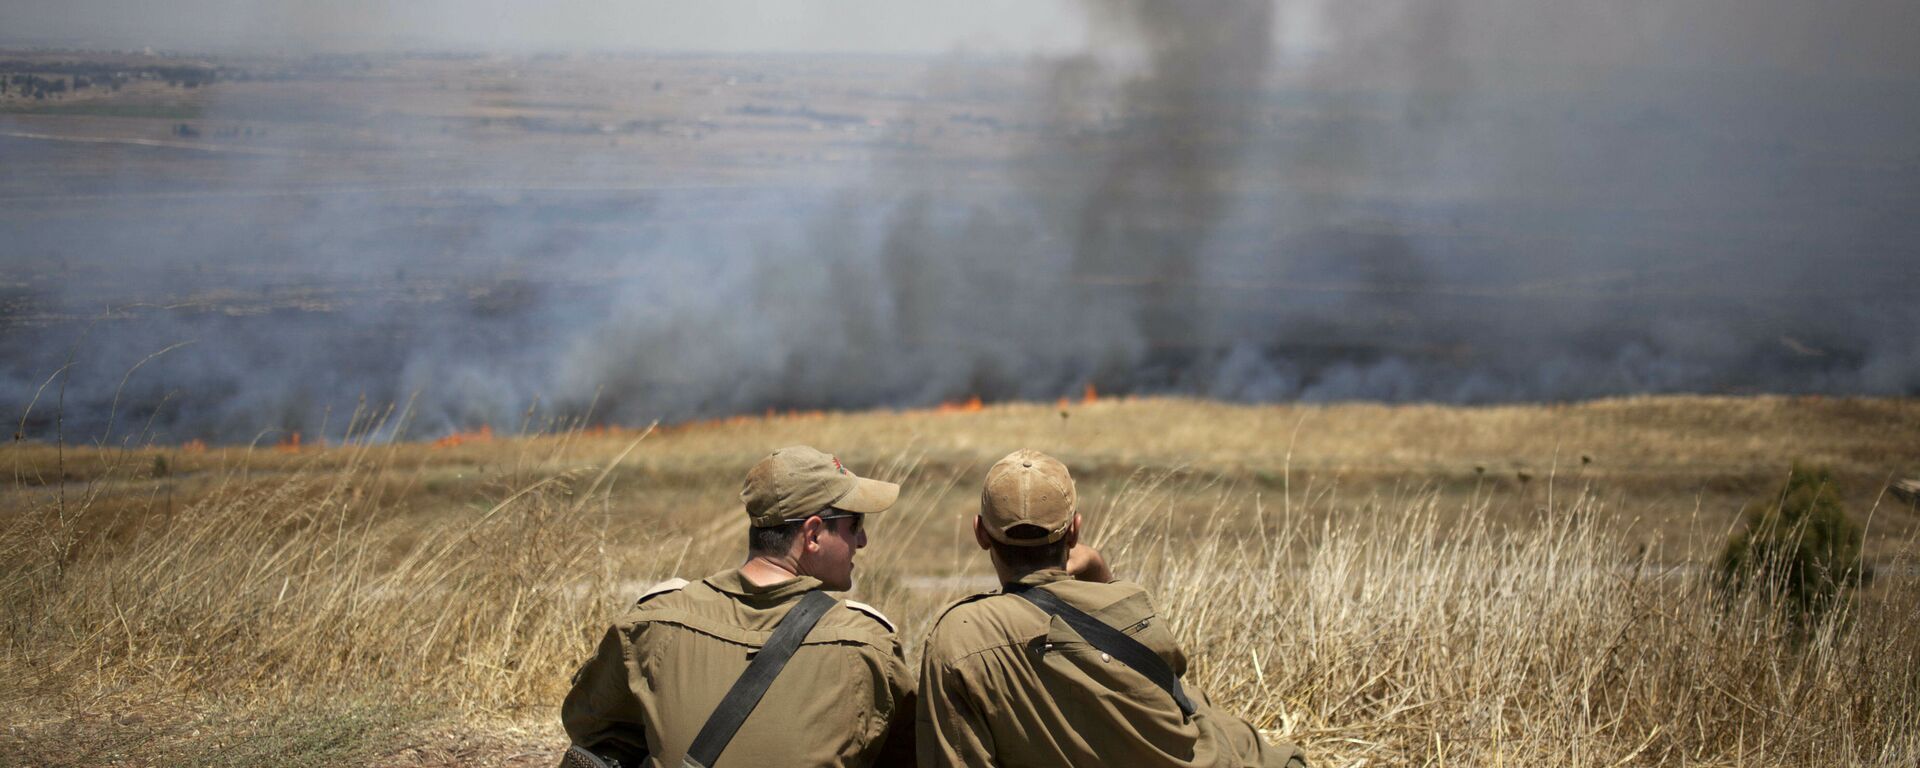 FILE - In this July 16, 2013, file photo, Israeli soldiers sit in a position on the border with Syria on the Israeli-controlled Golan Heights as smoke rises following explosions of mortar shells - Sputnik International, 1920, 11.10.2021